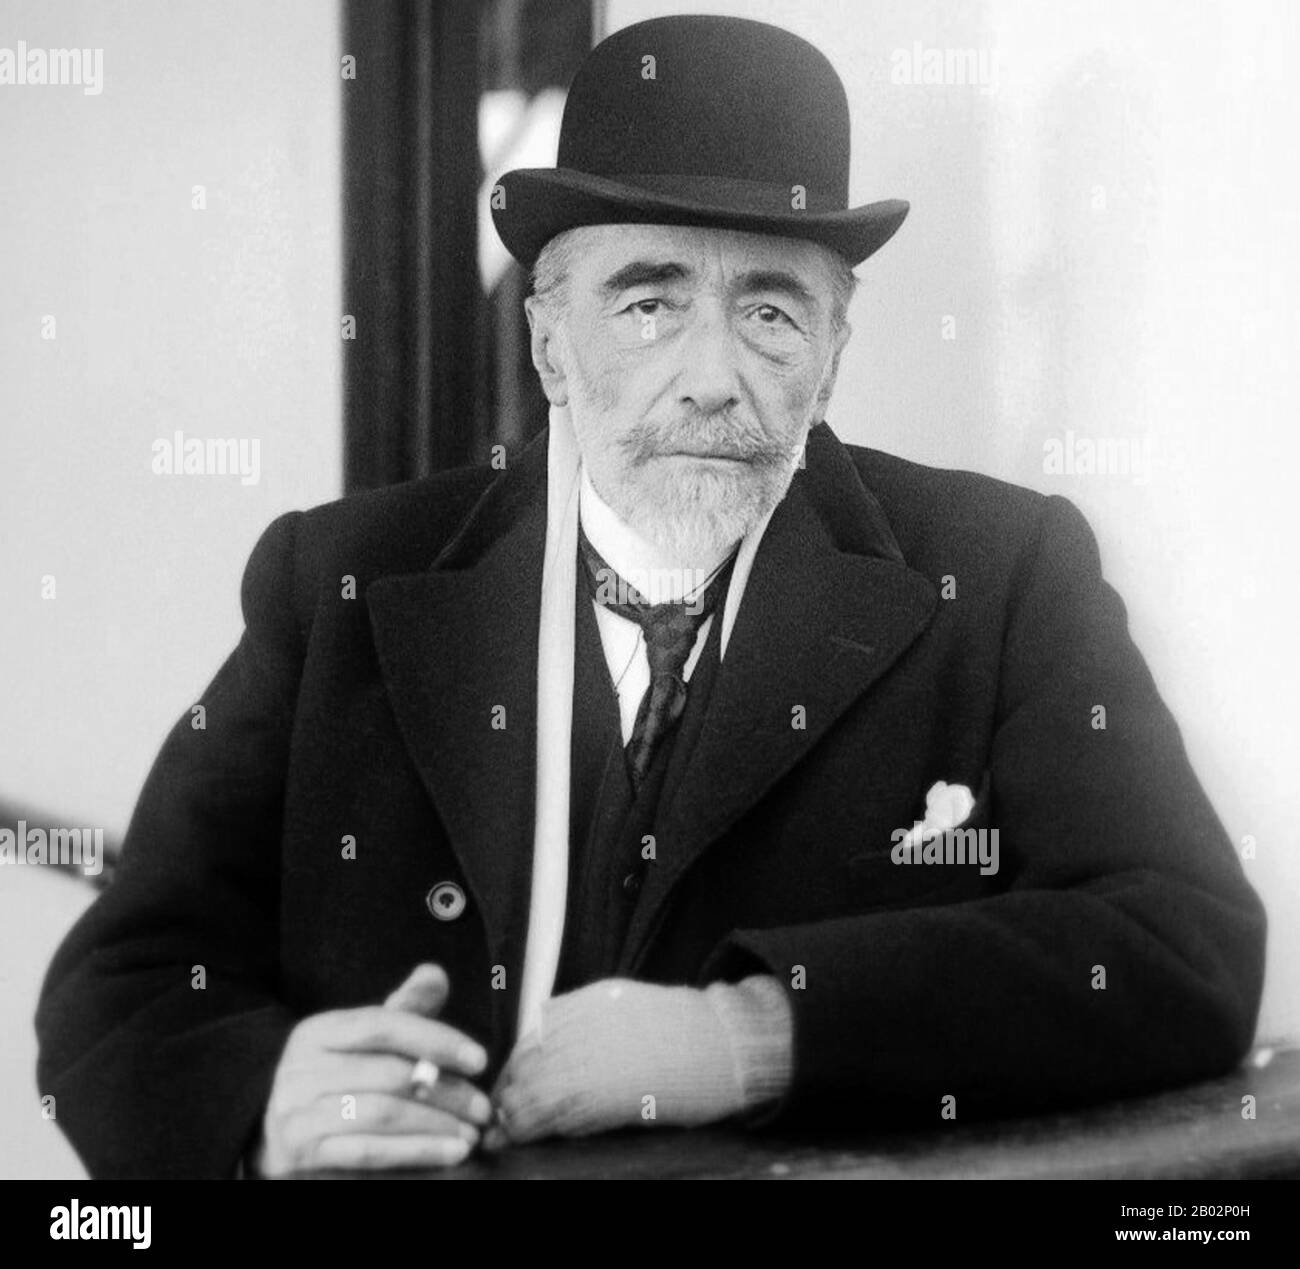 UK / Poland: Joseph Conrad, born Józef Teodor Konrad Korzeniowski (1857-1924) arriving in New York by ship, 1920. Joseph Conrad (born Józef Teodor Konrad Korzeniowski in Berdichev, Ukraine) was a Polish novelist who wrote in English, after settling in England. Conrad is regarded as one of the great novelists in English, although he did not speak the language fluently until he was in his twenties (and then always with a marked Polish accent). Stock Photo